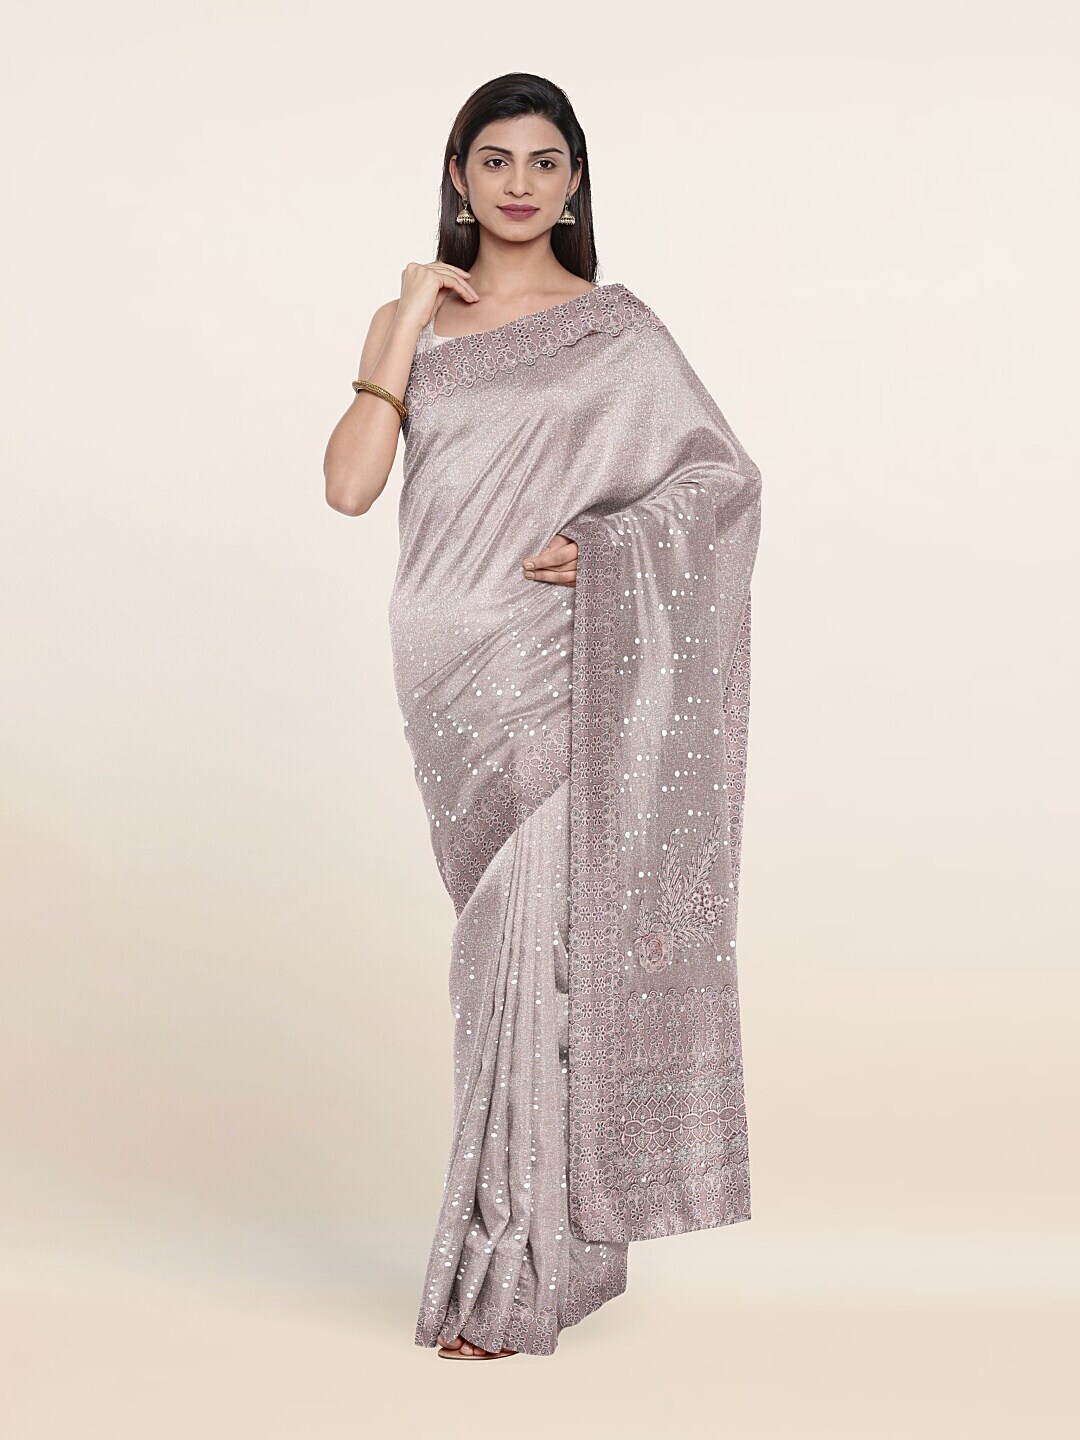 Pothys Peach-Coloured & Grey Embellished Beads and Stones Georgette Saree Price in India